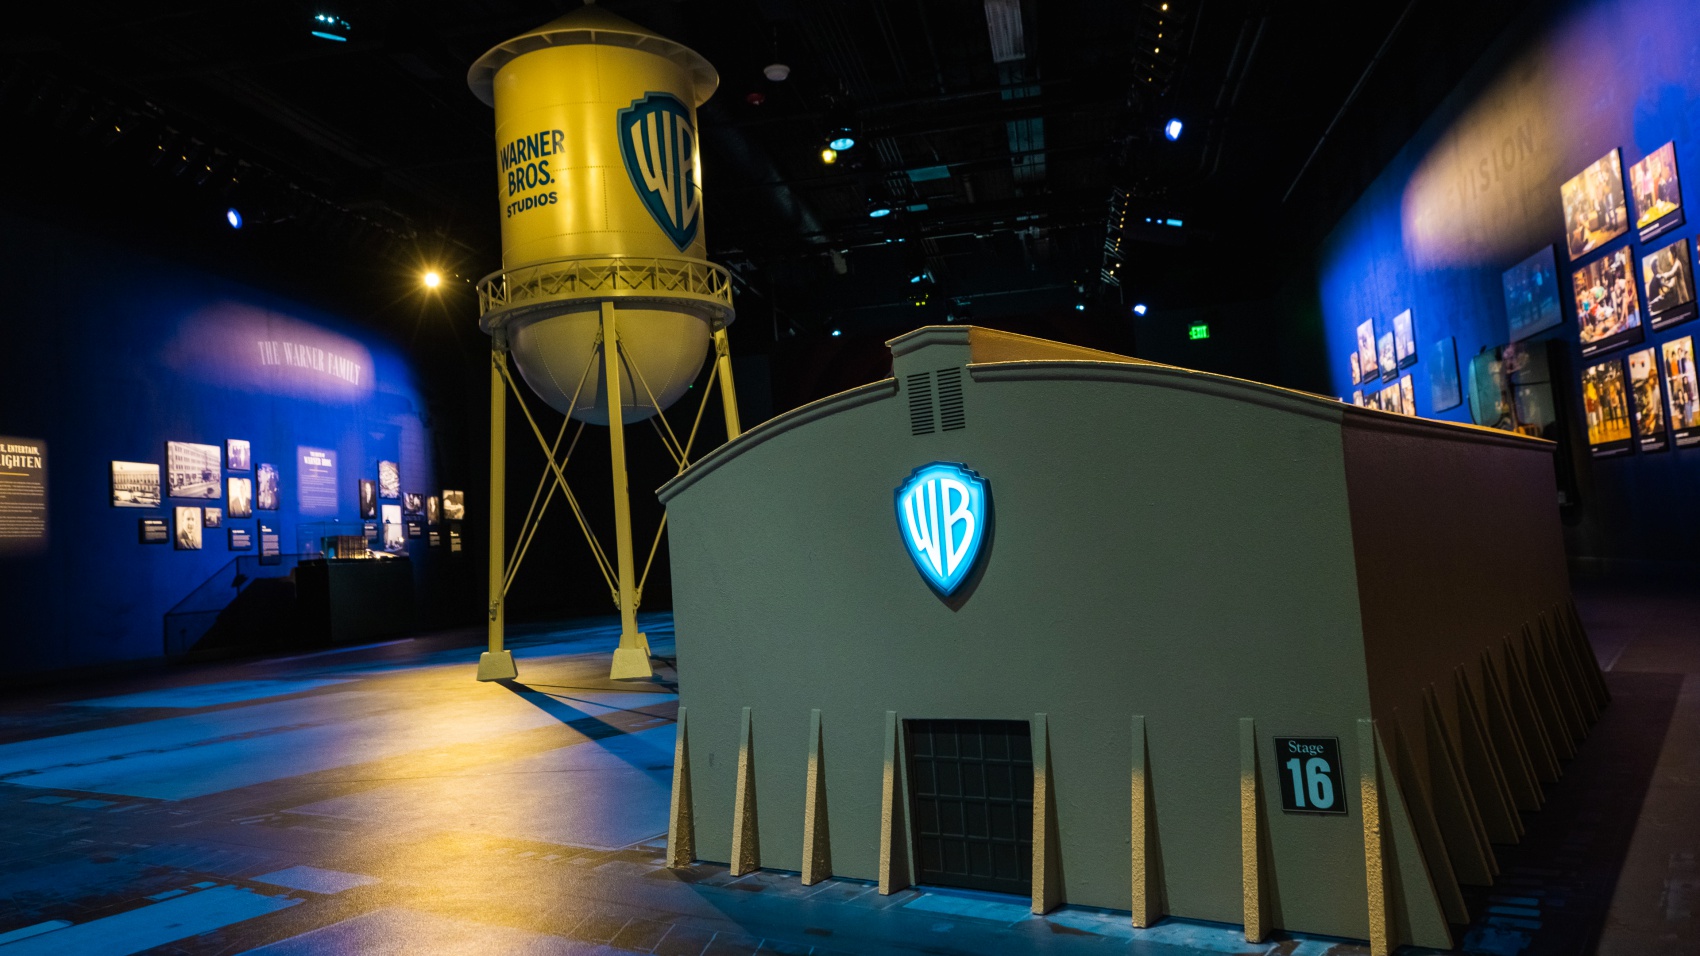 Warnerbrostourreopens ?quality=85&strip=all&fit=1700%2C956&w=1775&h=998&crop=1